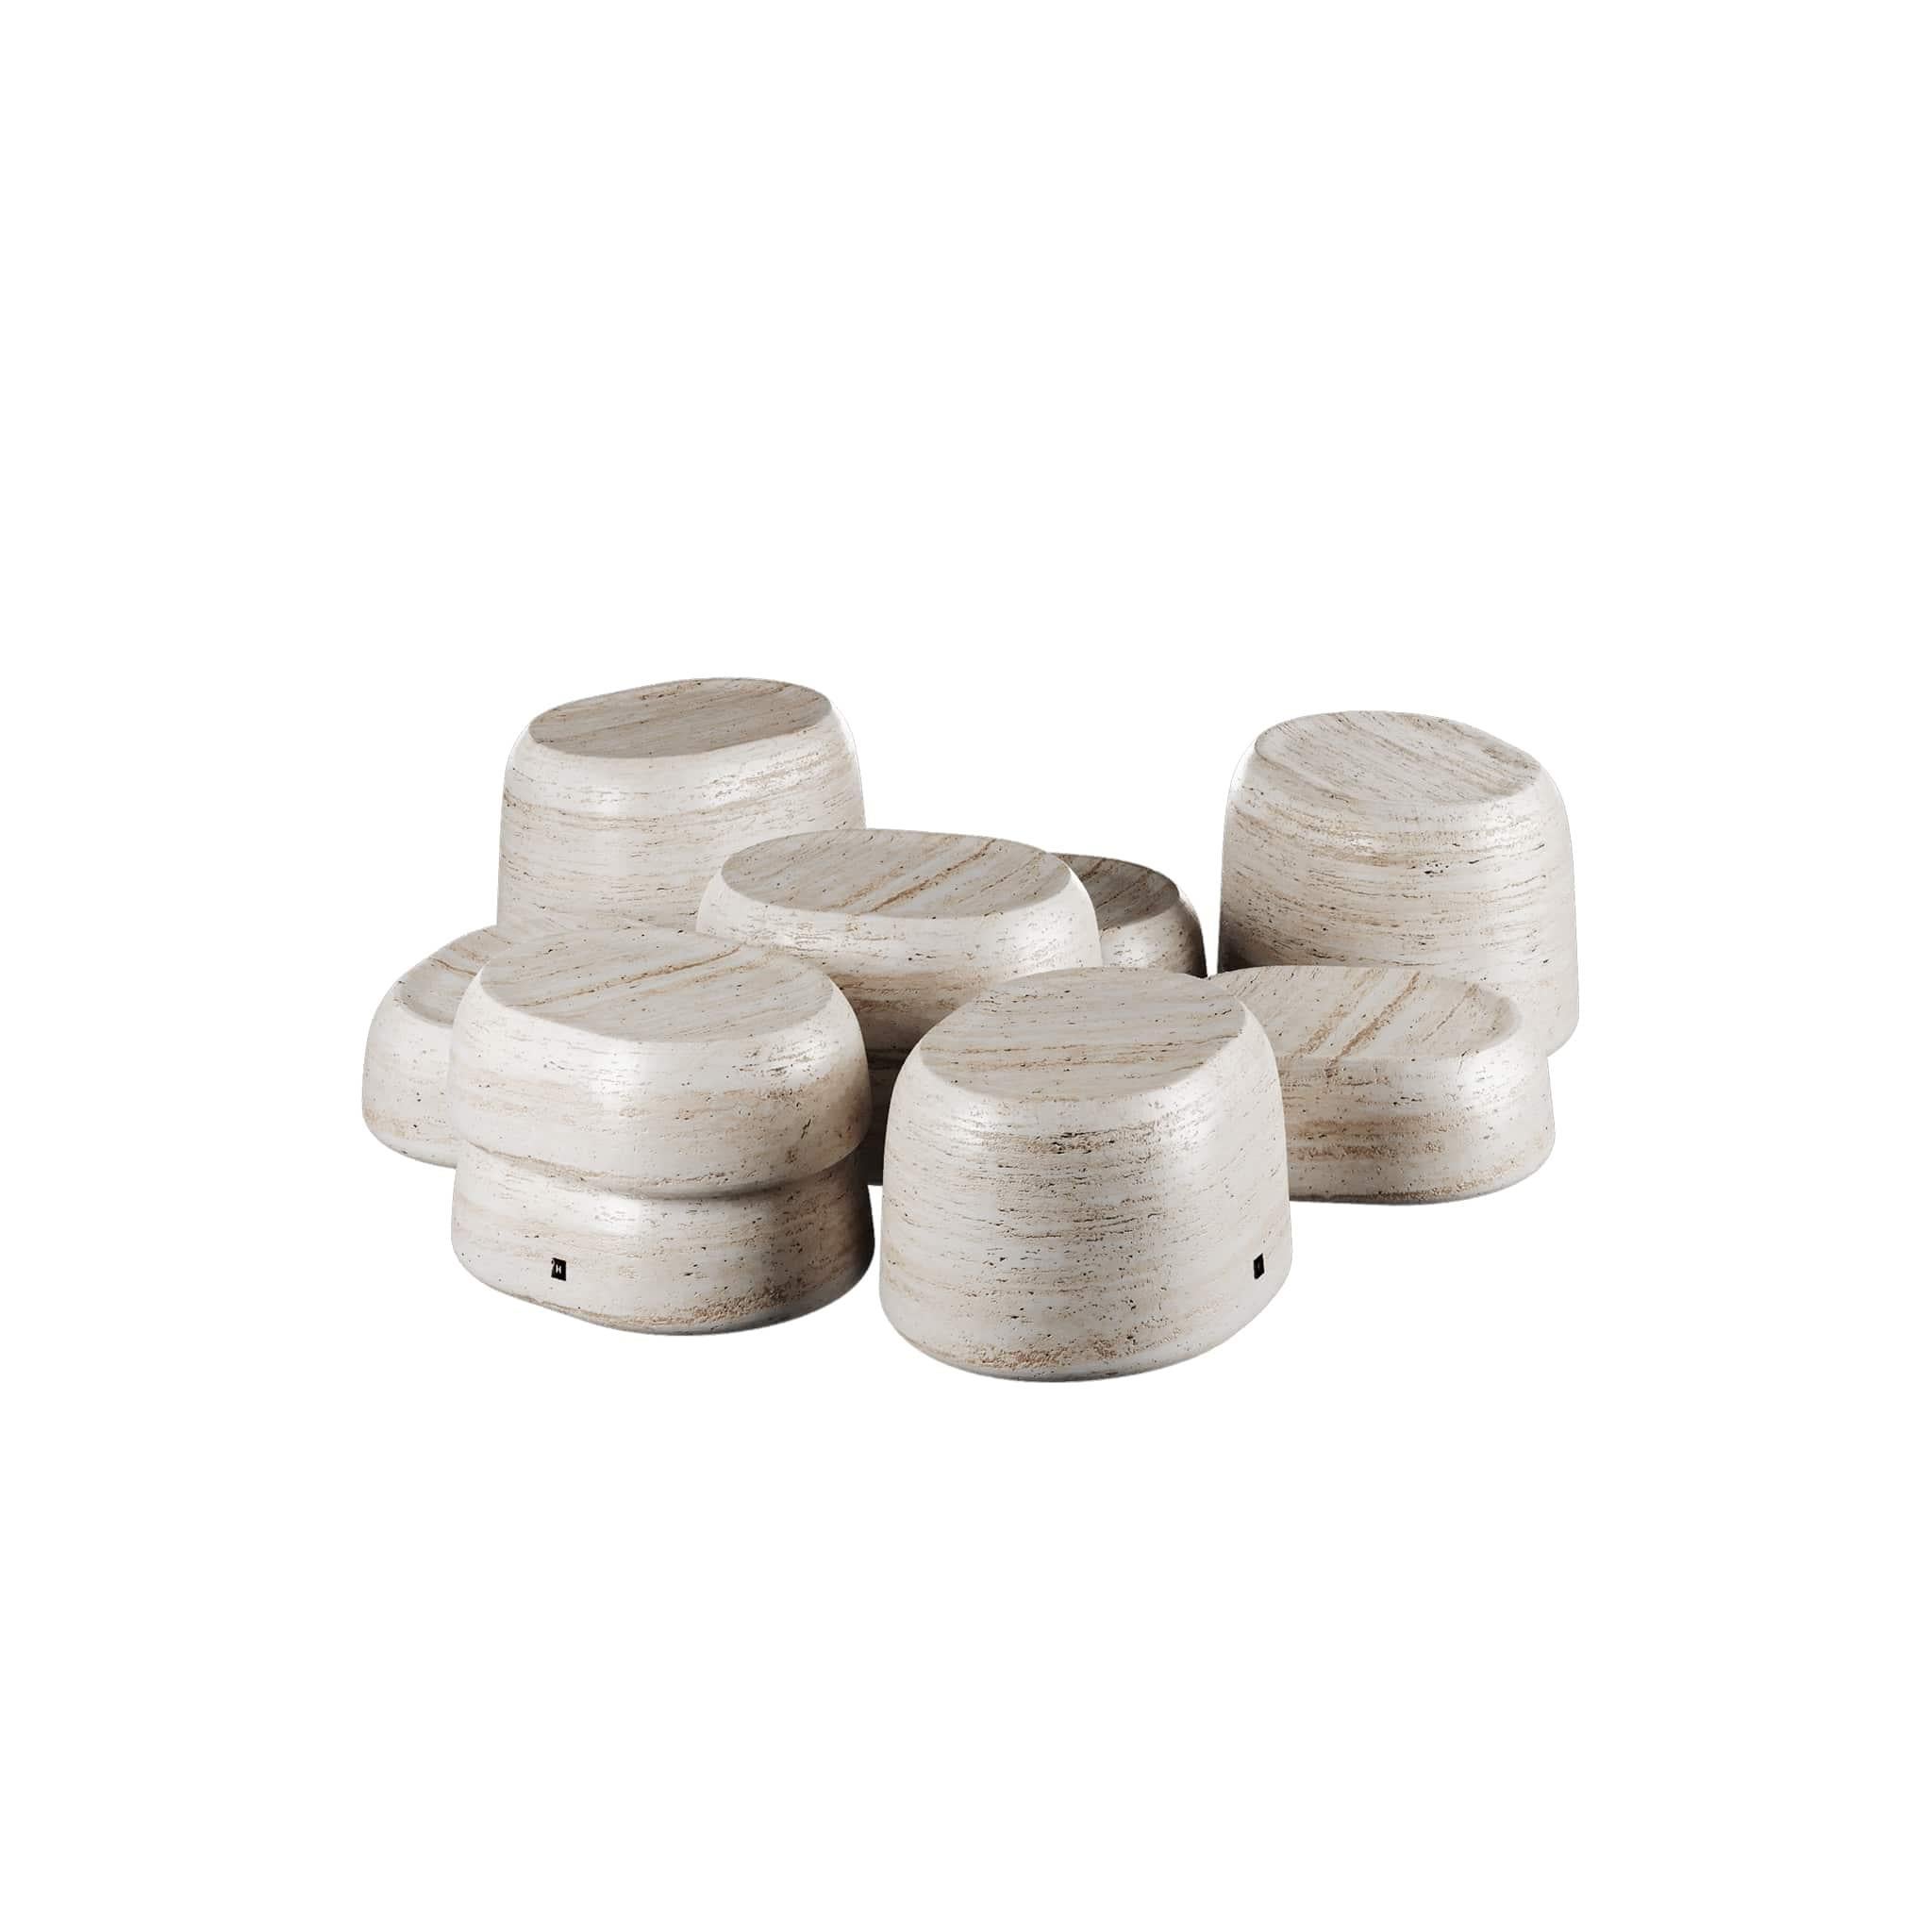 Fifih Side Tables Travertine Set 10 is a modern style set of three side tables in travertine marble. Entirely crafted of stone, this set flaunts a clean and sleek design, merging harmonious geometry and pure materials. Featuring different heights,